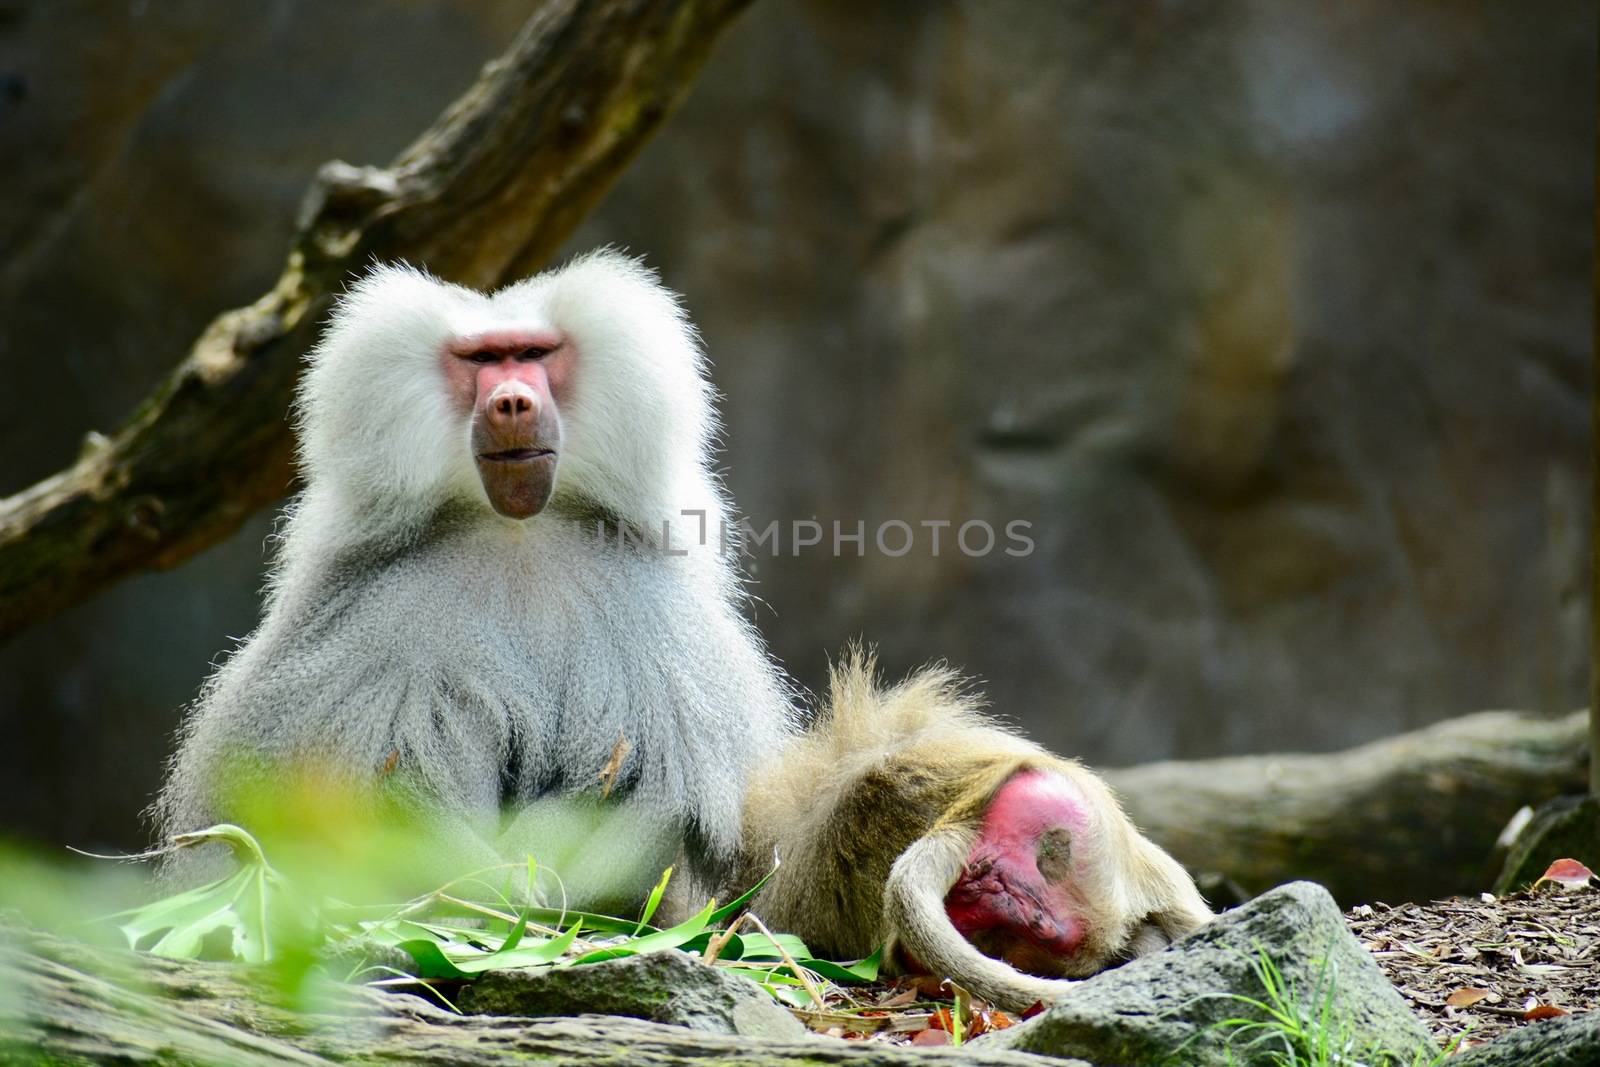 Hamadryas Baboon (Papio hamadryas), also referred to as Sacred Baboons. They belong to a group of monkeys found in Africa and Asia (Old World monkeys). by Marshalkina